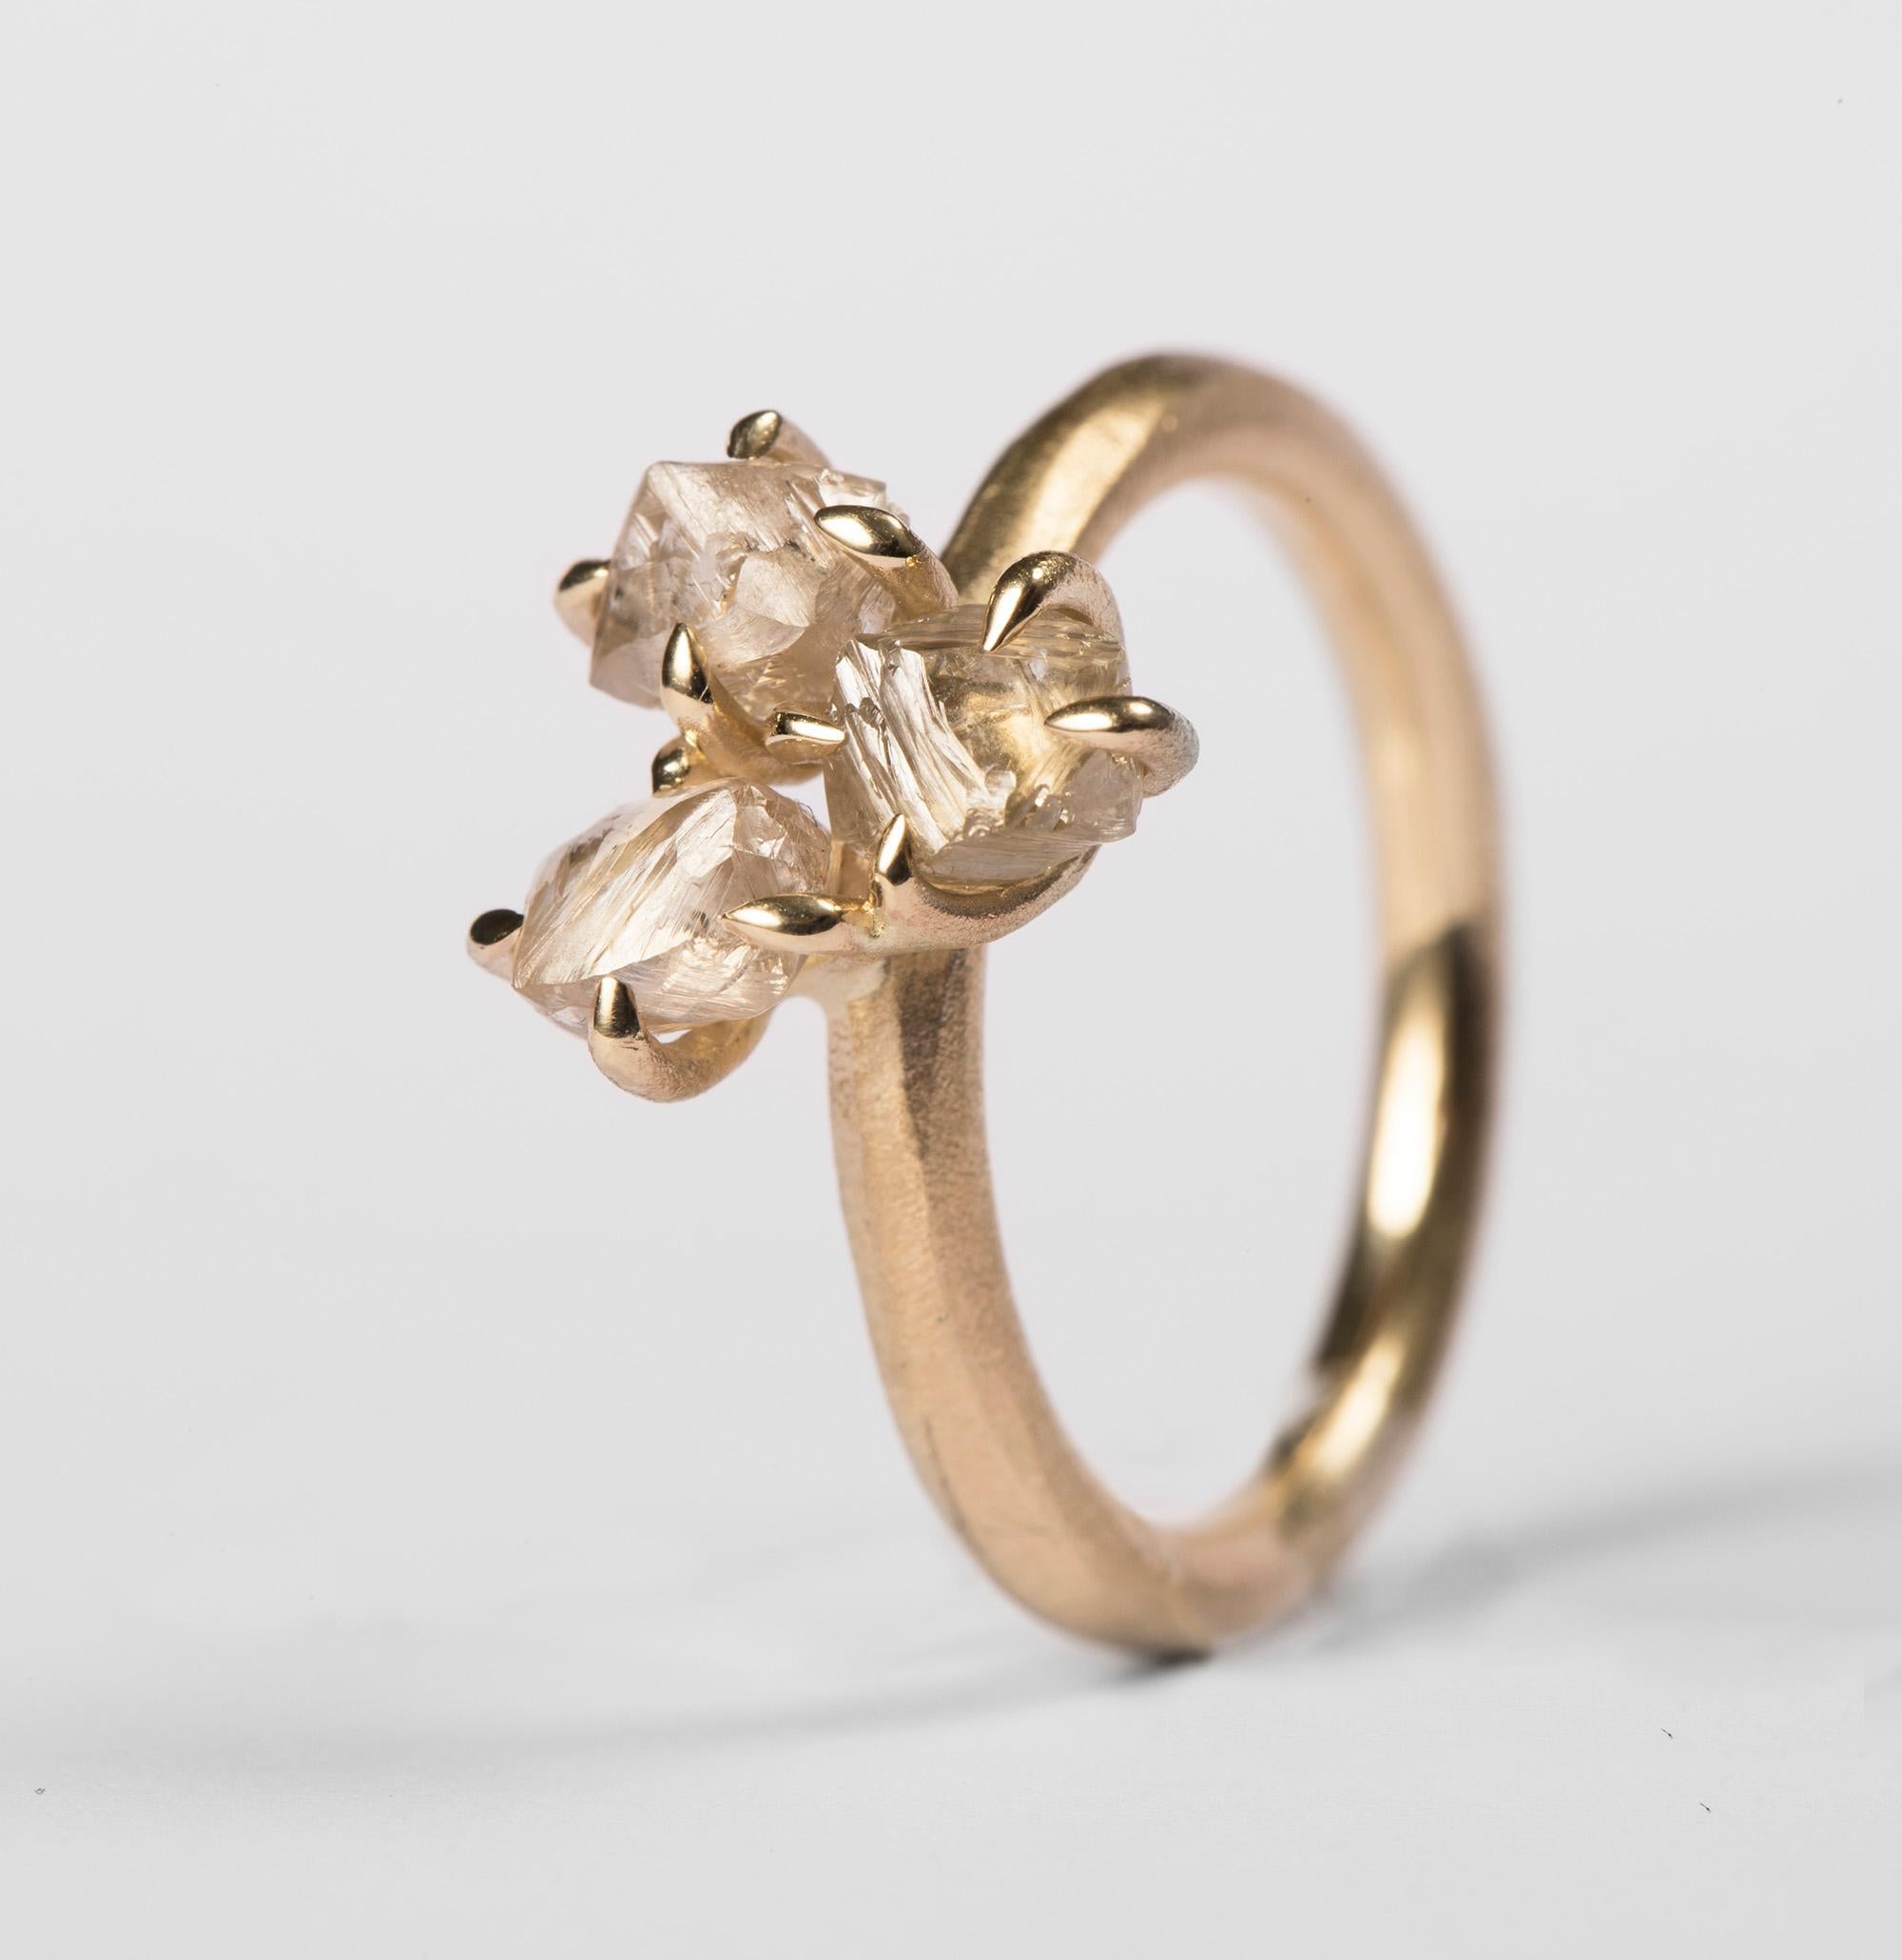 2.40 ct. Natural Whitish Rough Diamonds in 14K handcrafted gold ring

Origin of Diamond: Russia  

Every rough diamond from Roughdiamonds dk has been personally handpicked by Maya Bjørnsten. The diamonds we reject are sent back to be cut into